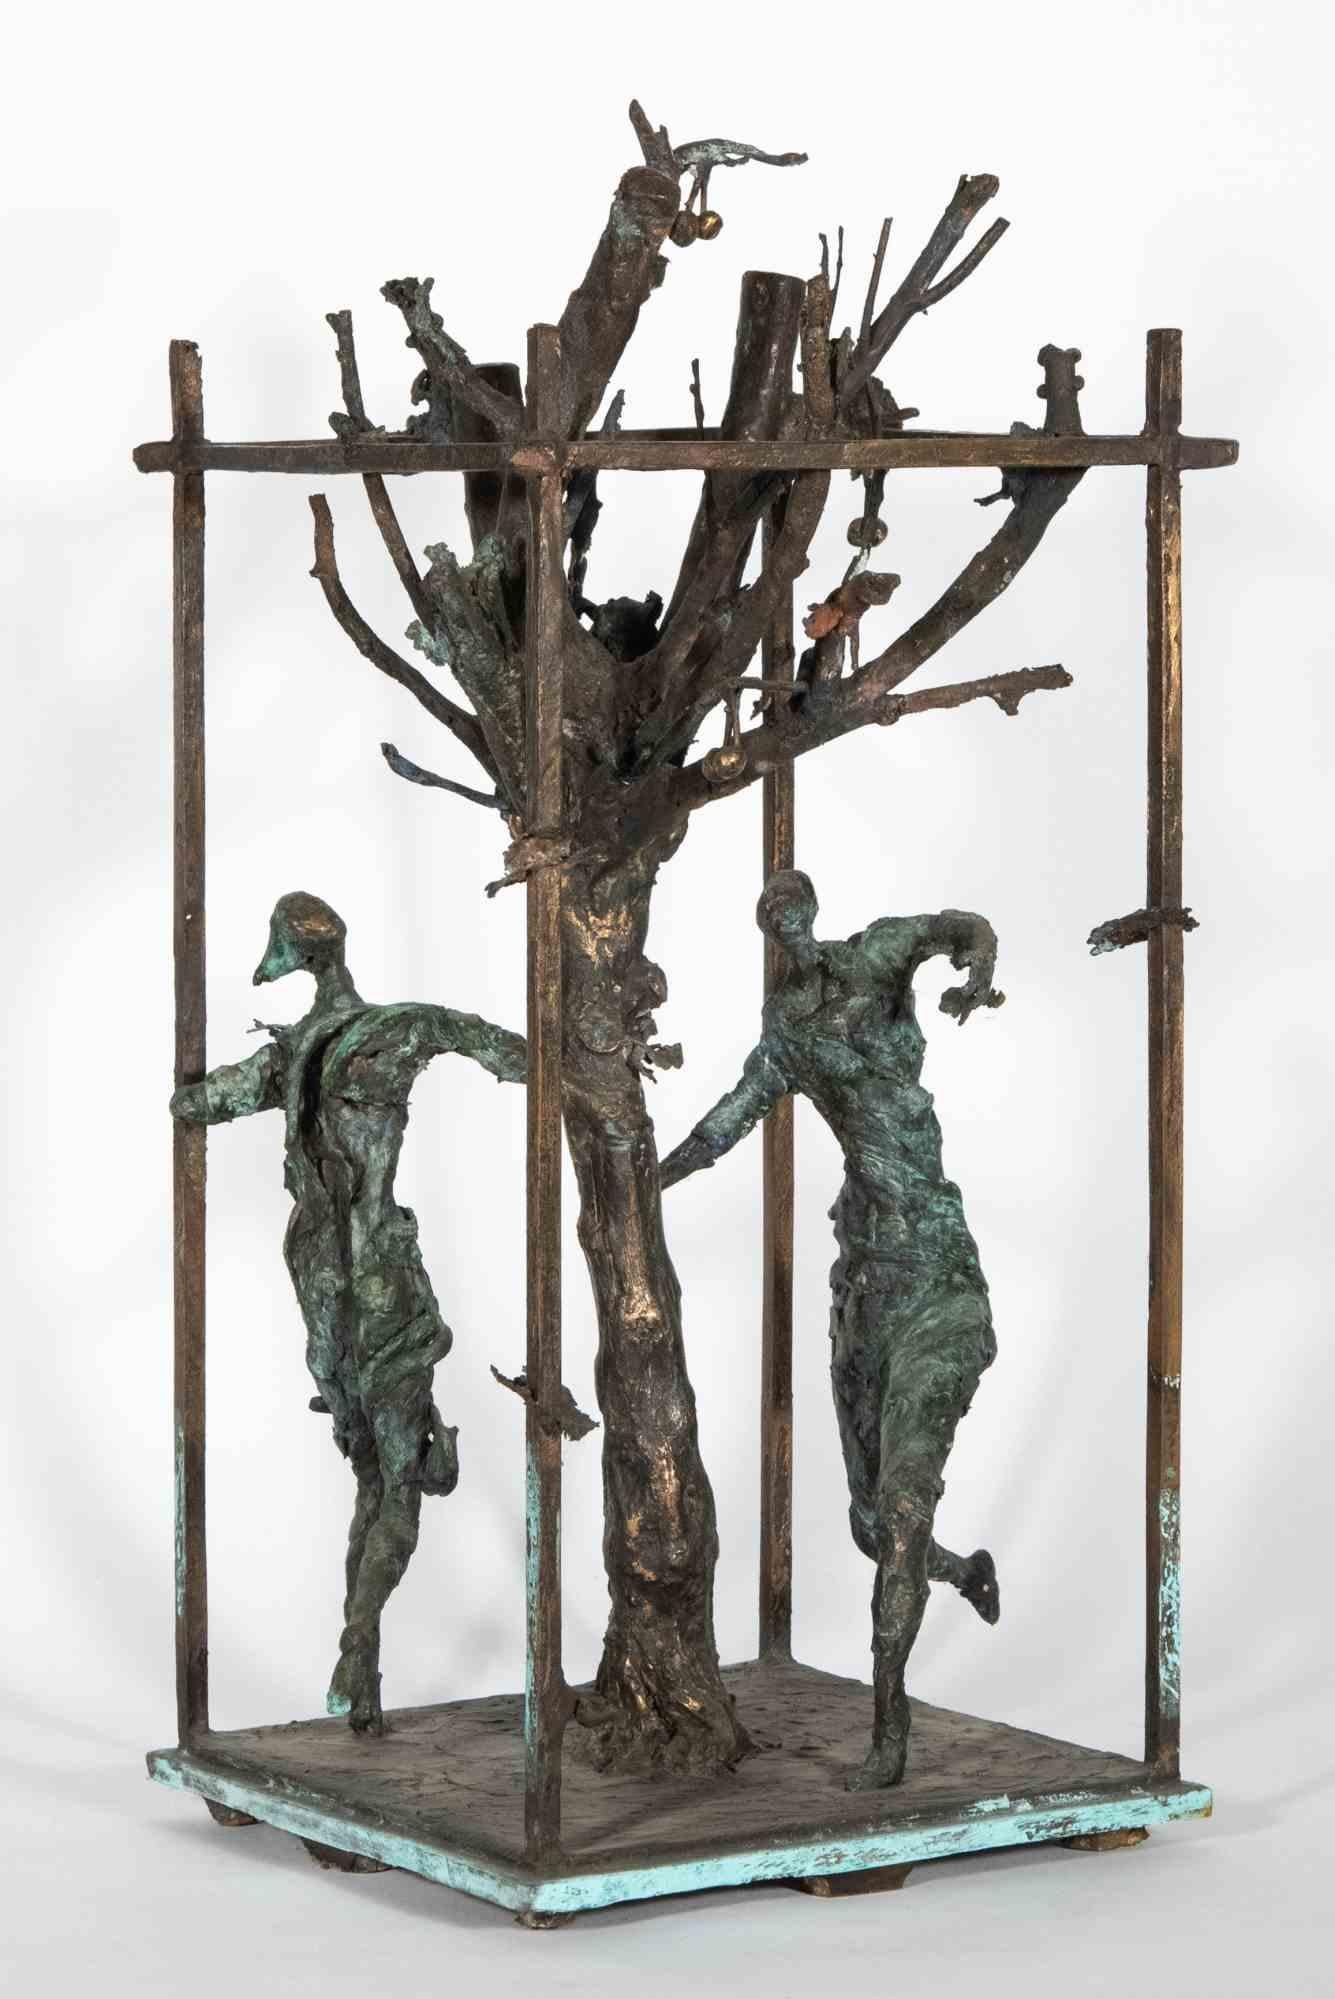 The Tree of Life - Sculpture by Lorenzo Servalli - 1996